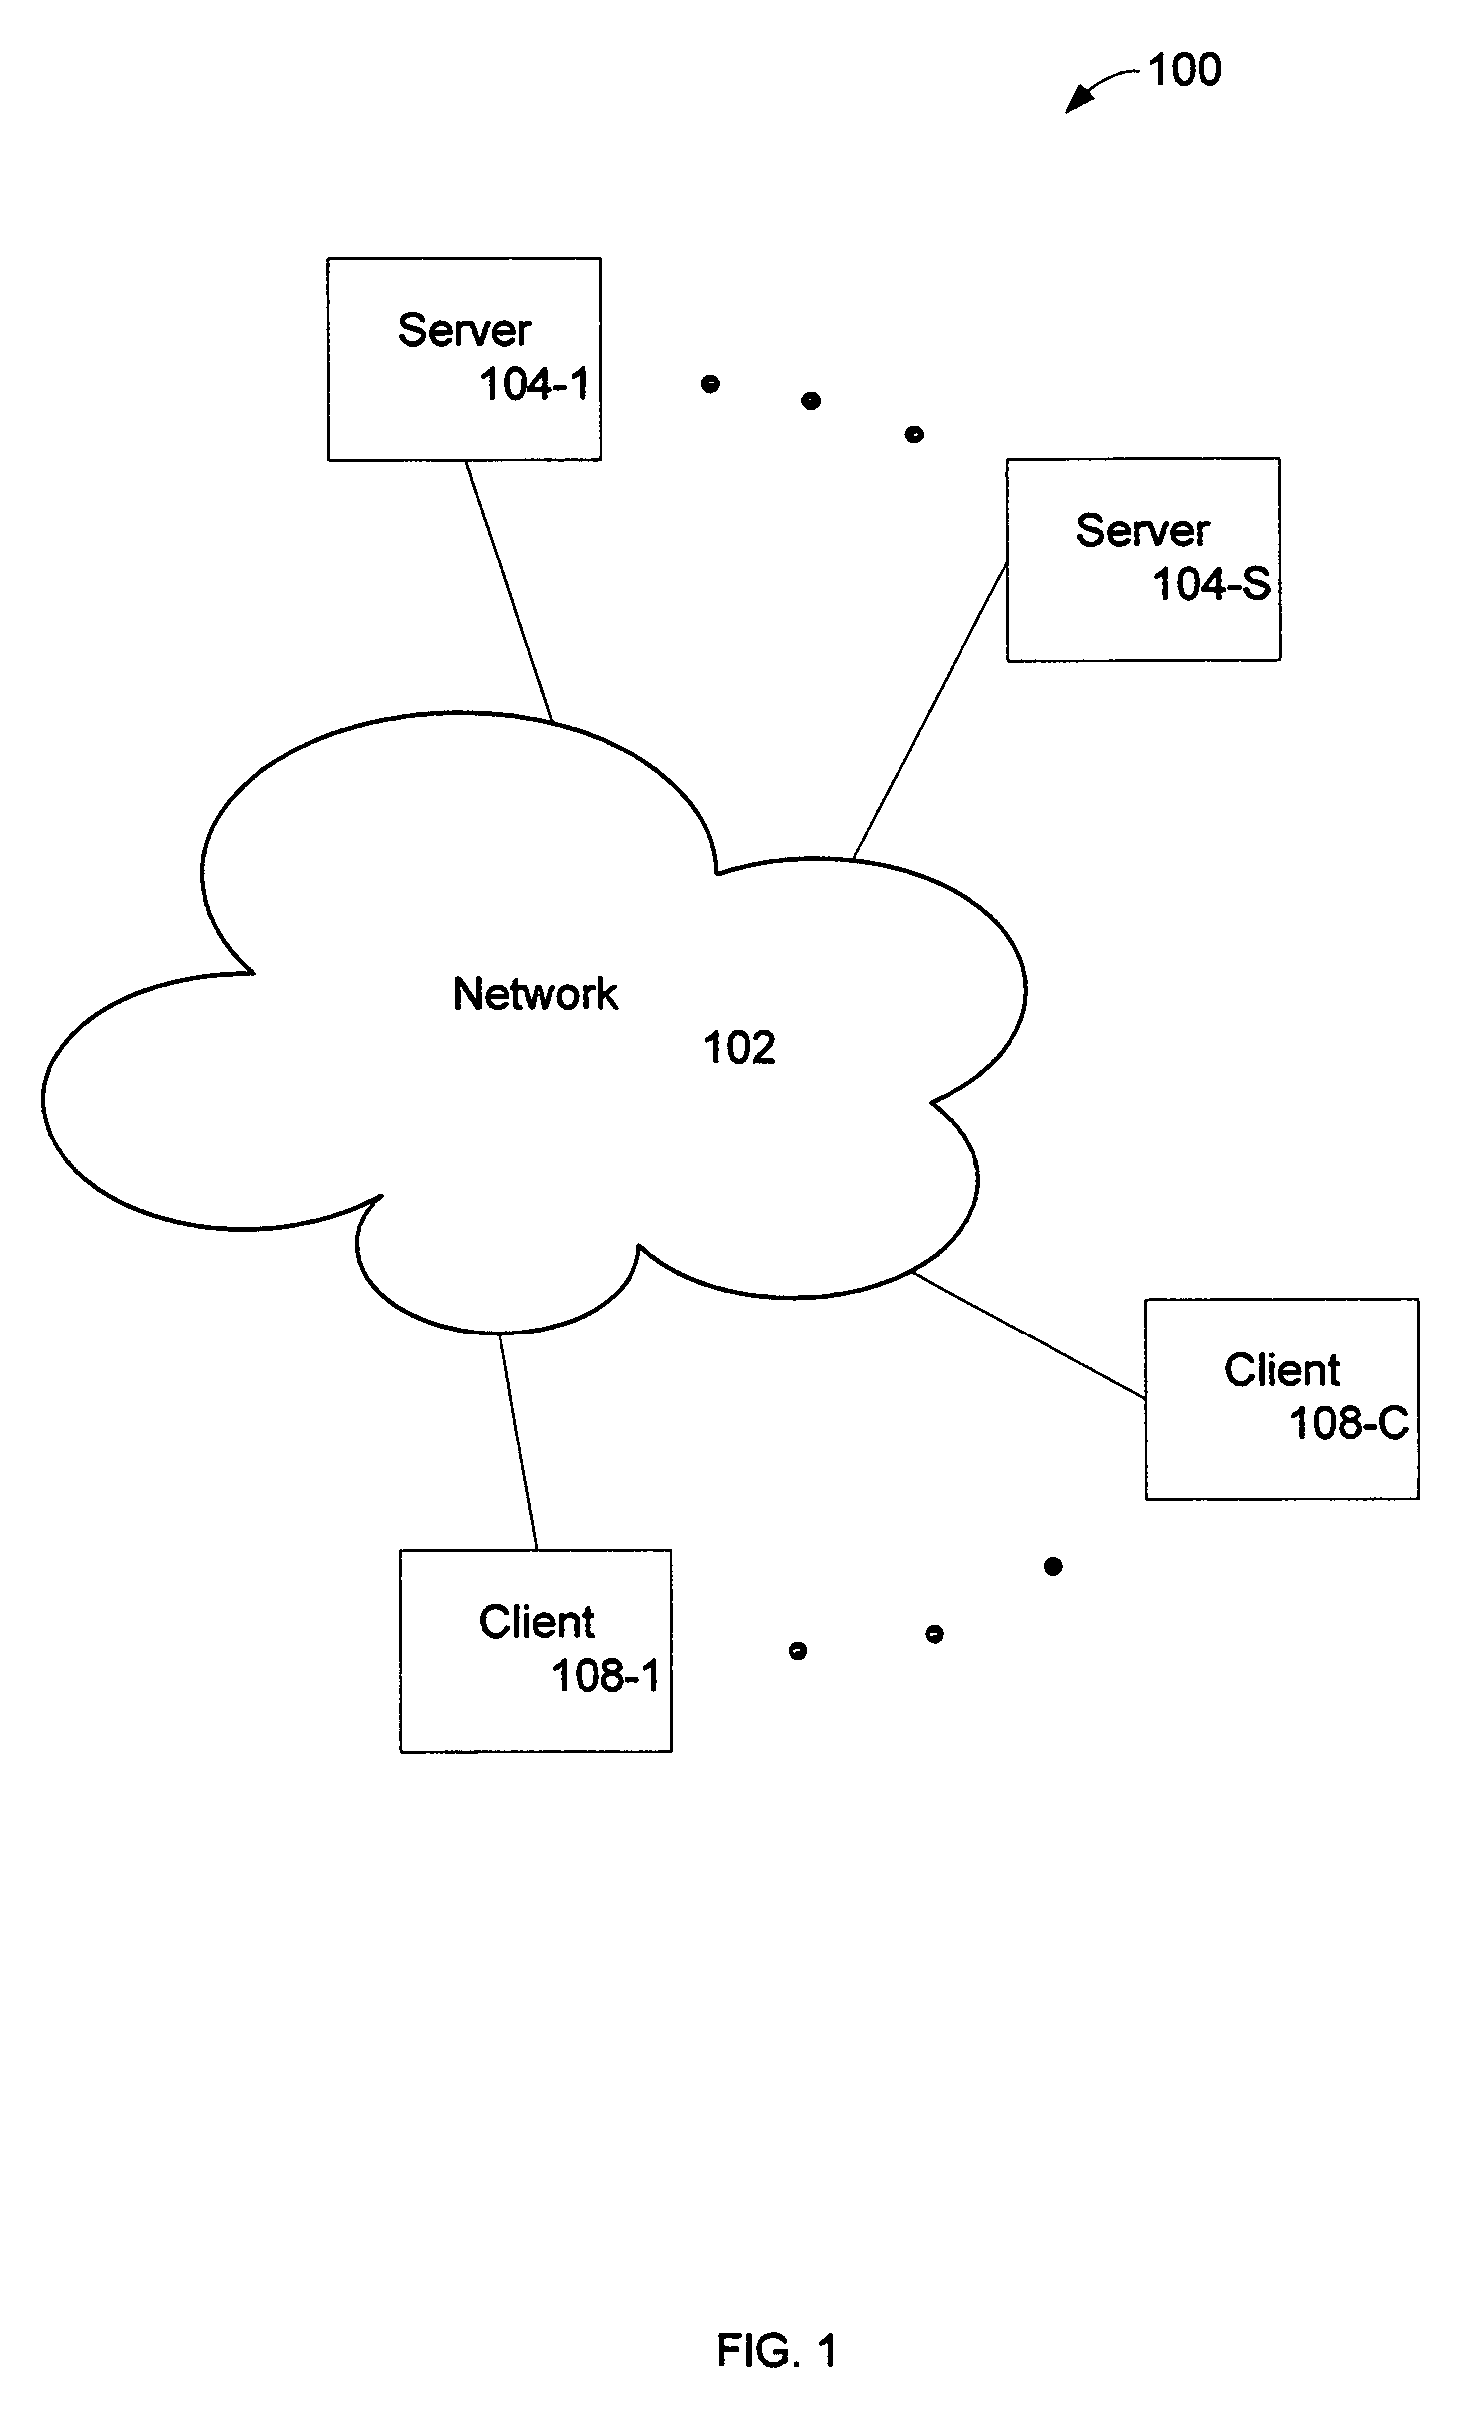 Method and apparatus for fundamental operations on token sequences: computing similarity, extracting term values, and searching efficiently